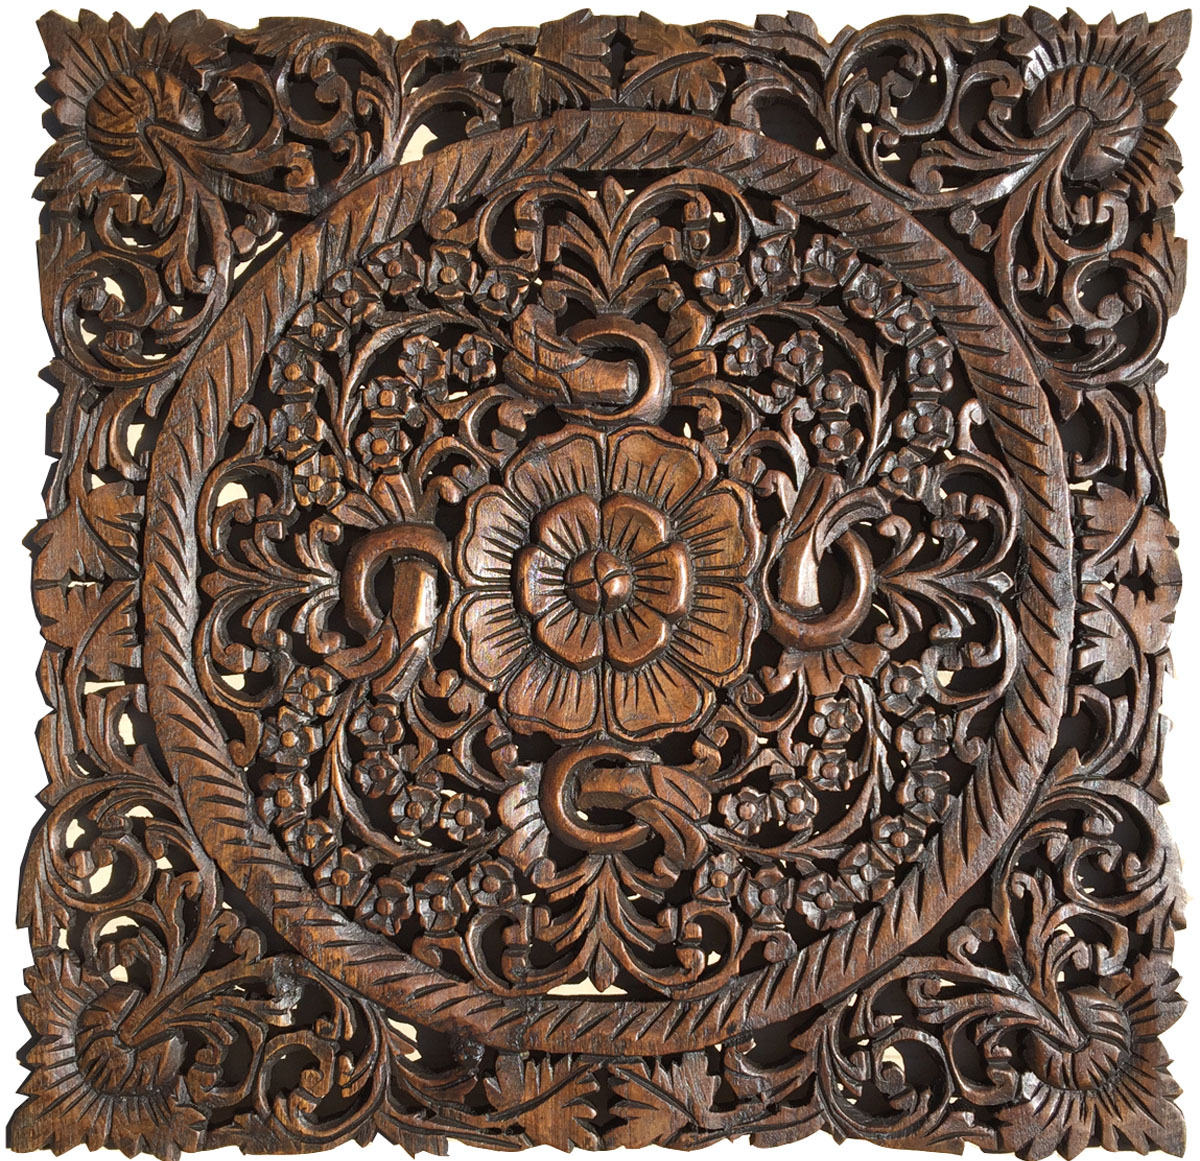 Carved Wood Wall Decor.Oriental Floral Wood Wall Art Plaque.Dark Brown.24"Square - Sculptures ...